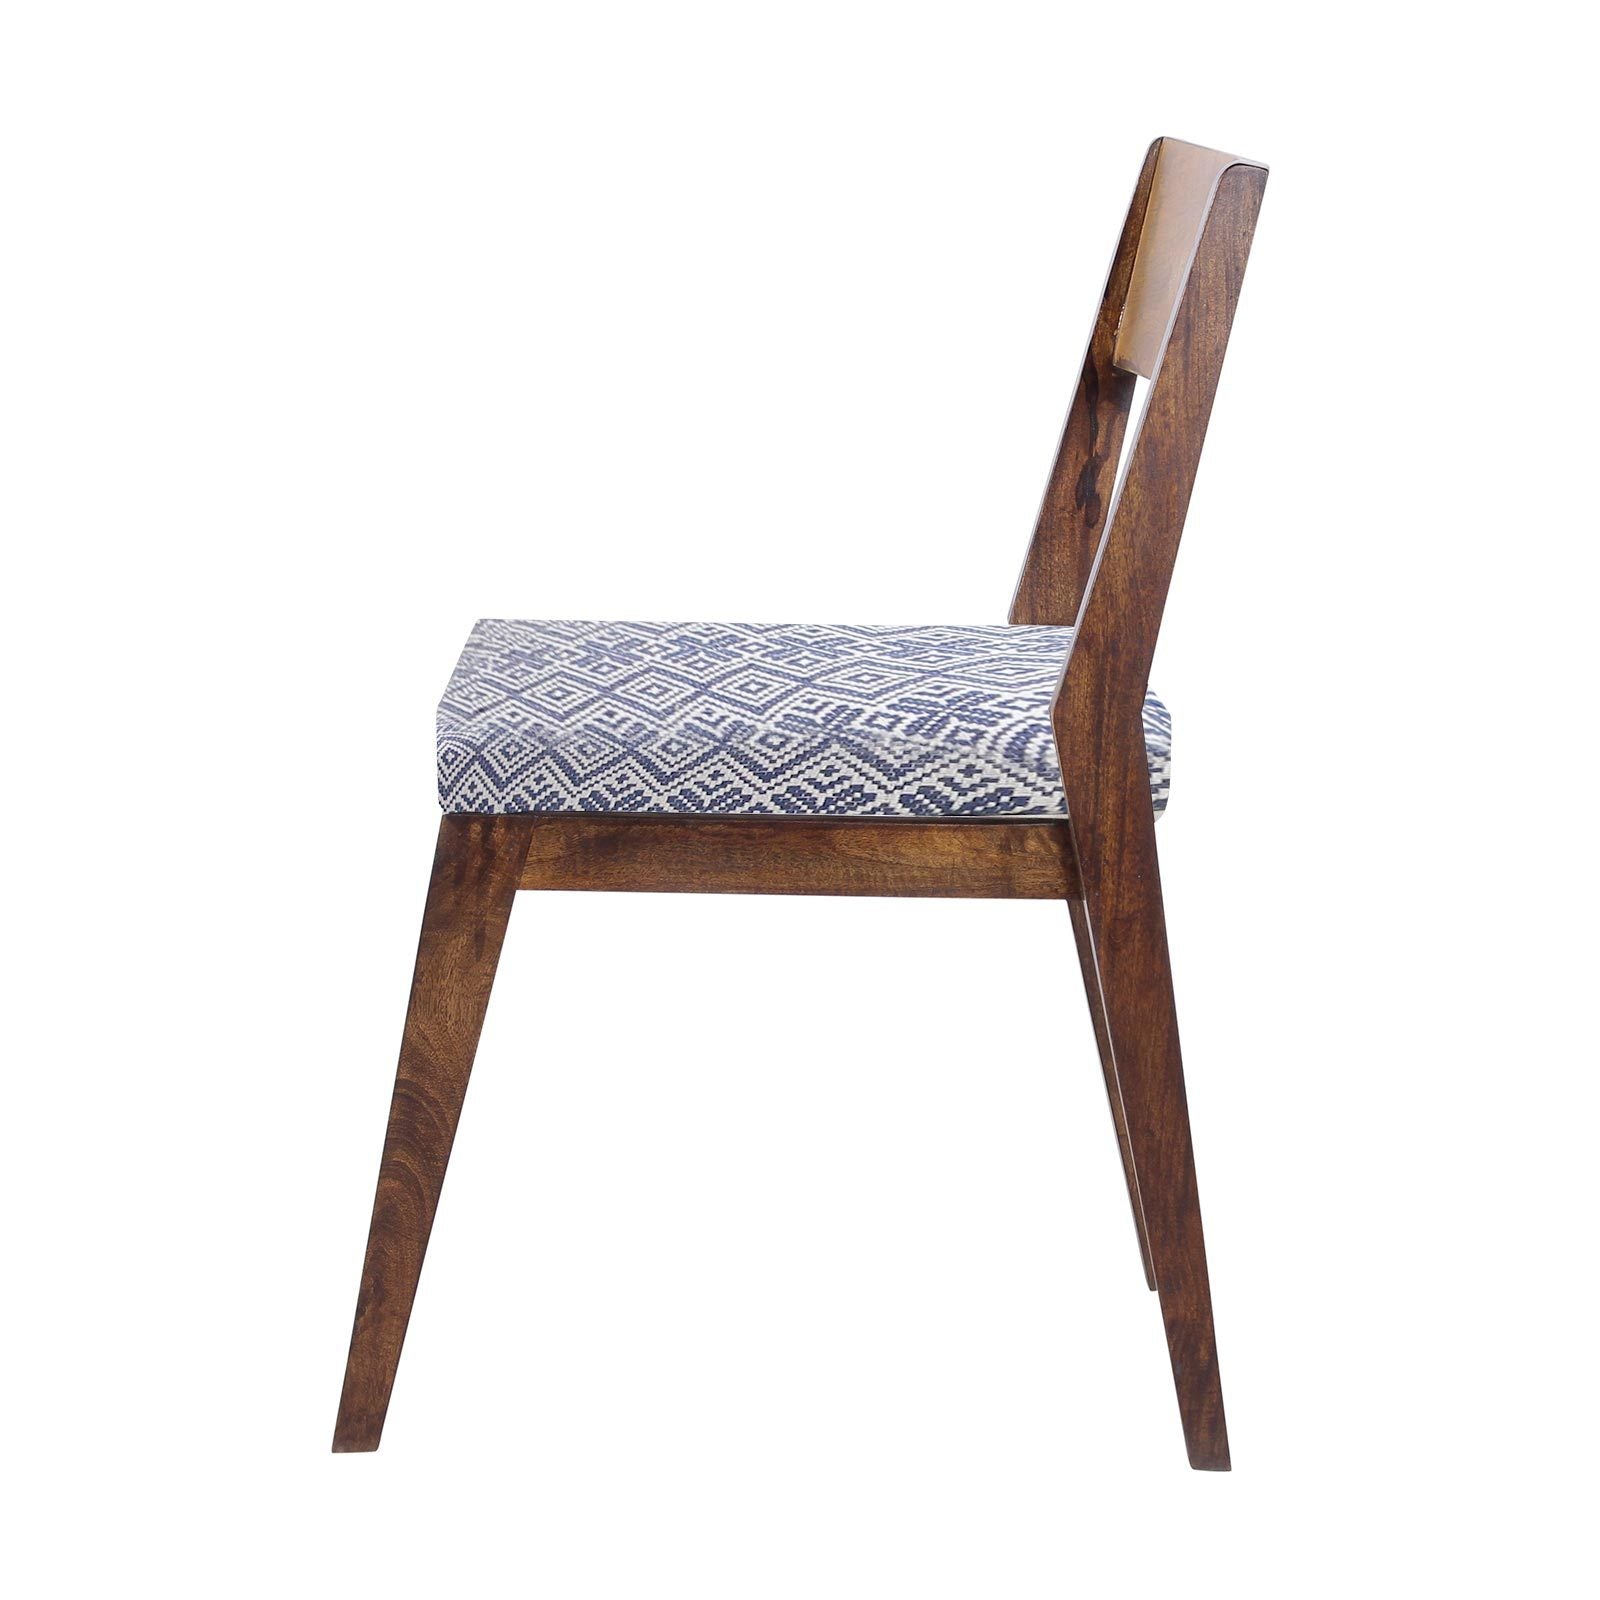 Wooden chairs online